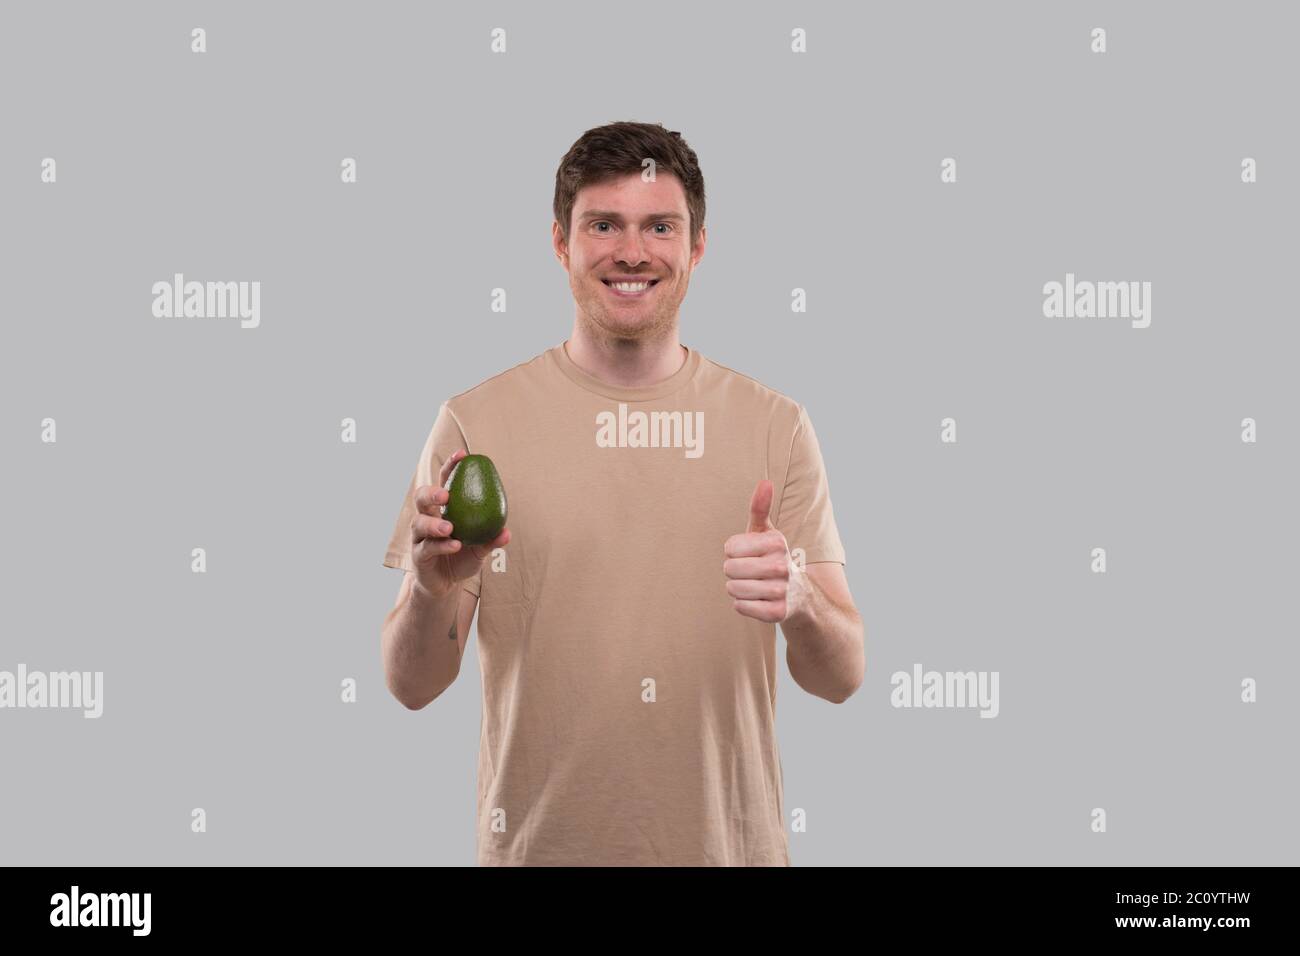 Man Holding Avocado and Thumb Up Isolated. Healthy Life, Eat Green Concept Stock Photo